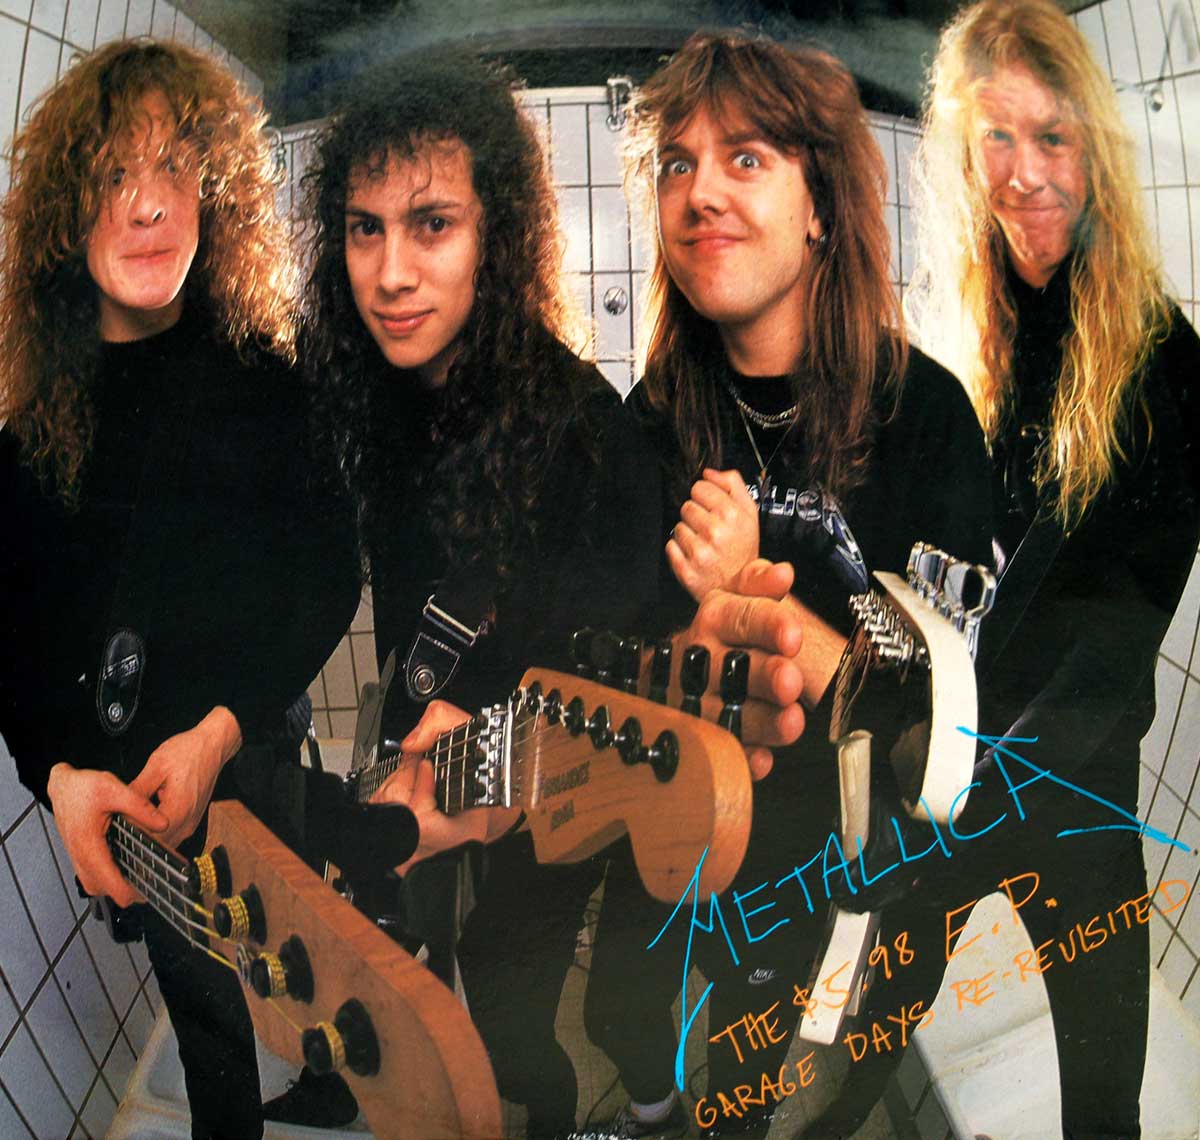 High Quality Photo of Album Front Cover  "METALLICA - The 5.98 Garage Days Revisited (UK)"